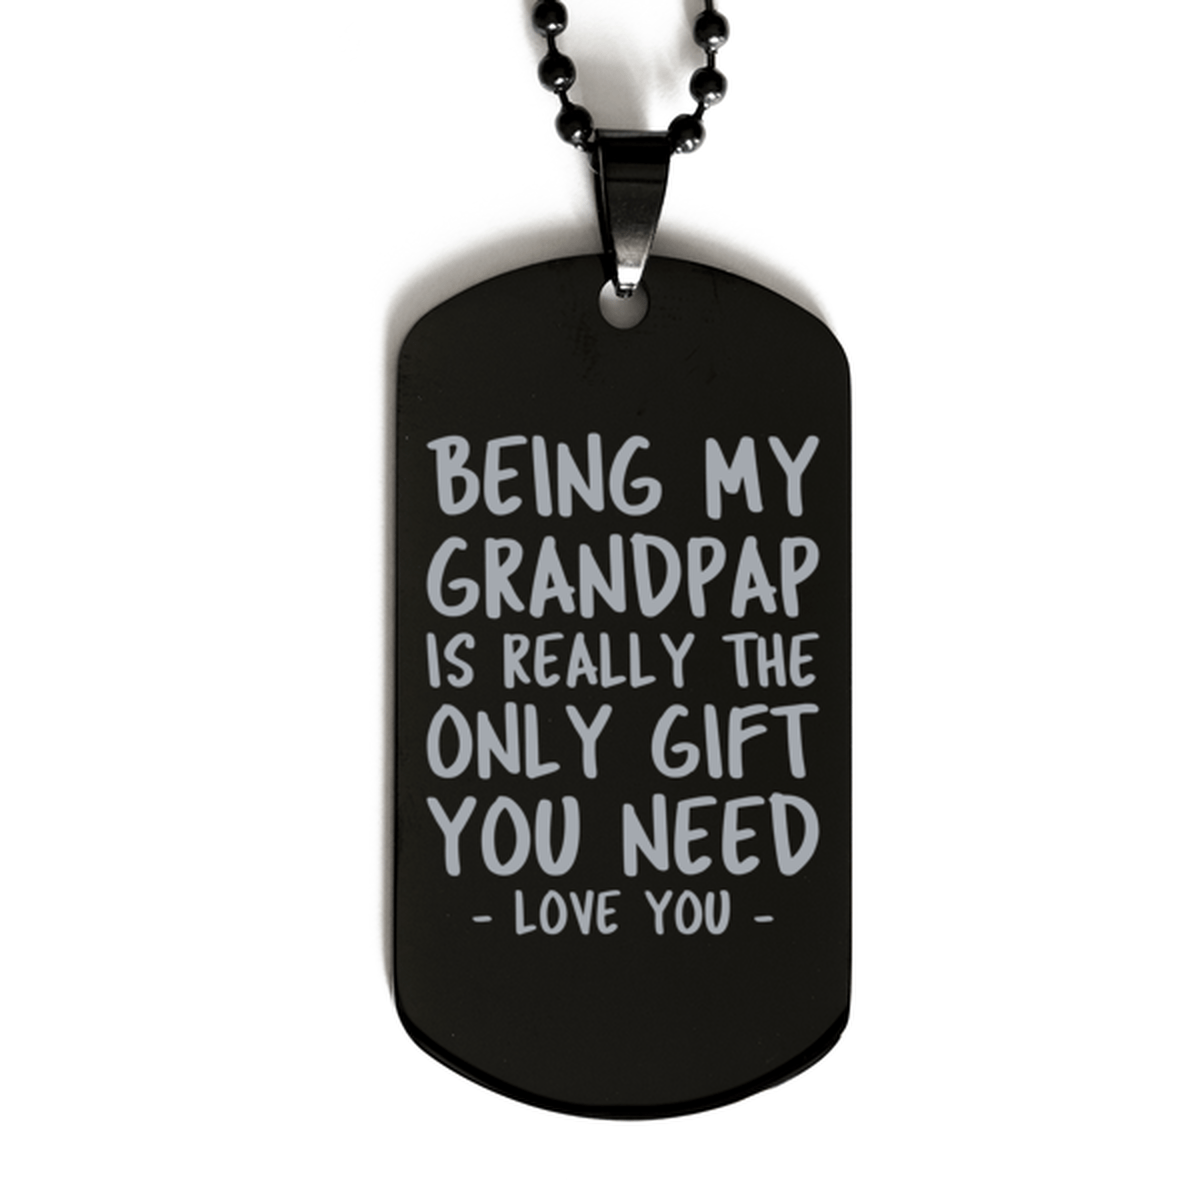 Funny Grandpap Black Dog Tag Necklace, Being My Grandpap Is Really the Only Gift You Need, Best Birthday Gifts for Grandpap